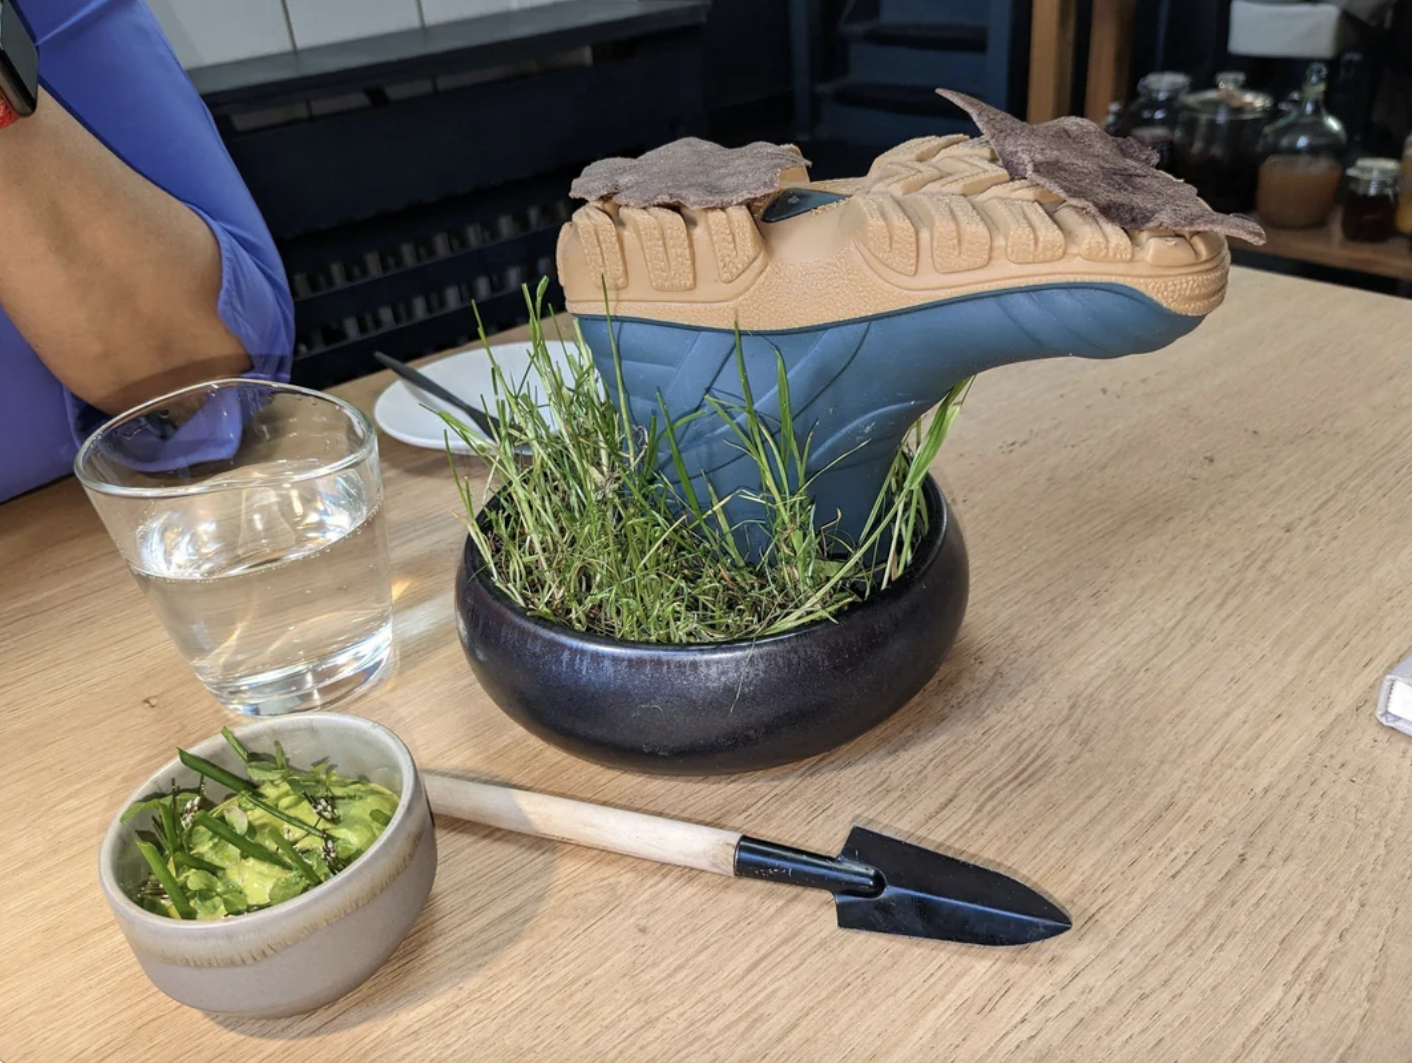 a hiking boot in a bowl of grass being used as a tray for food